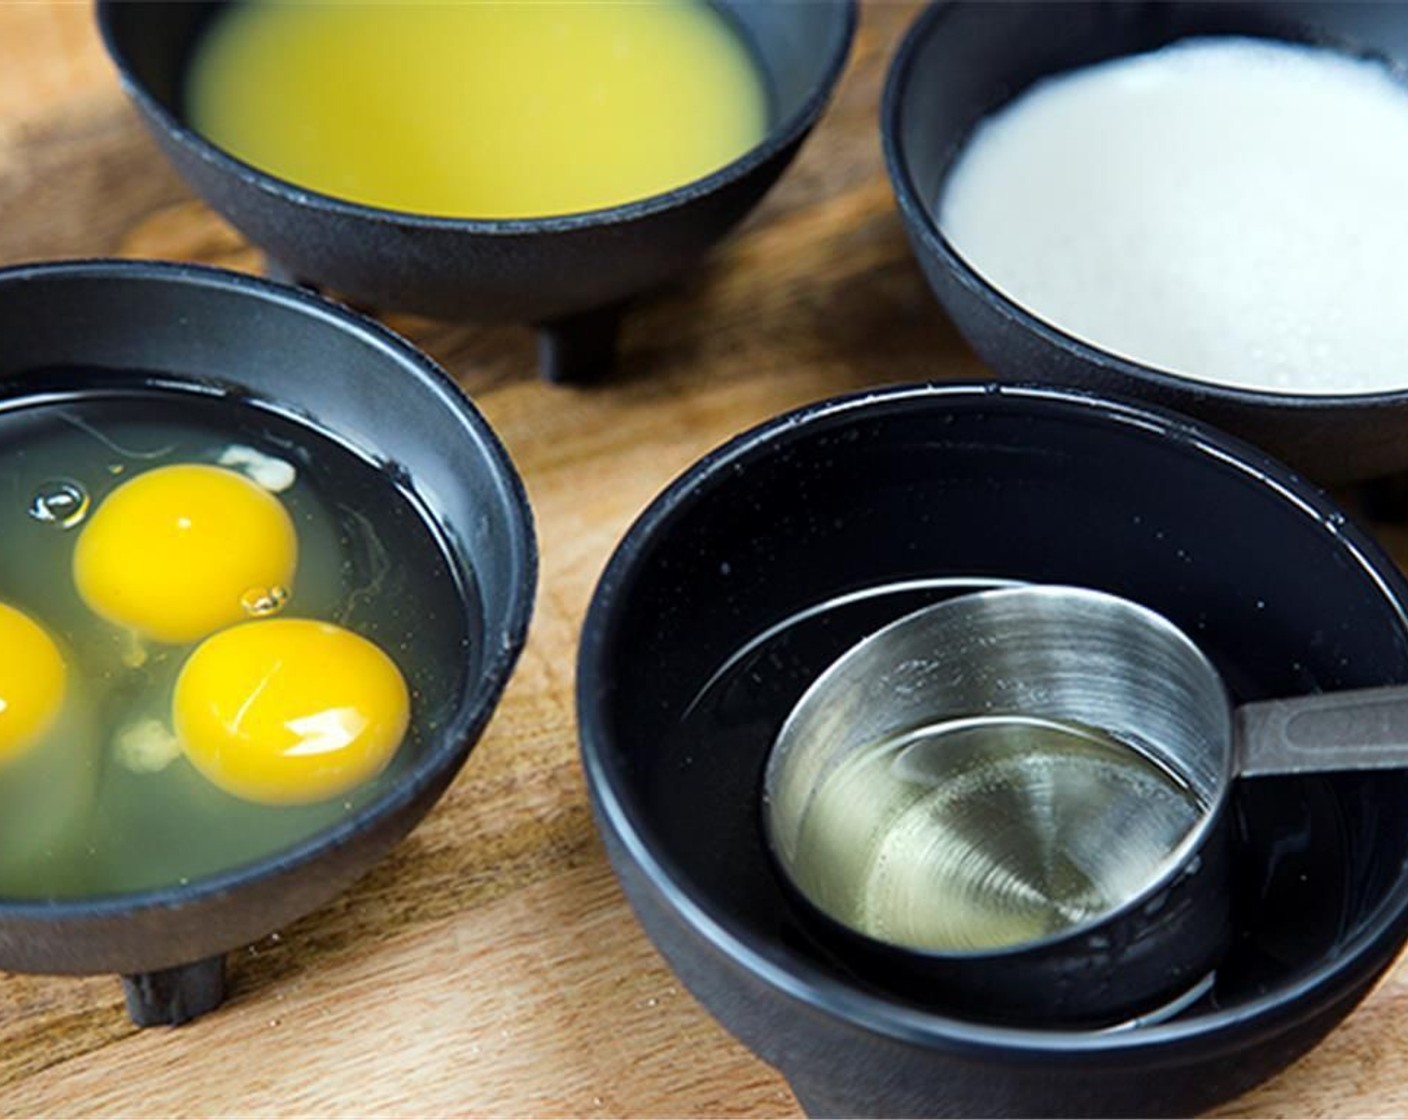 step 2 In small bowl combine Eggs (3), Orange Juice (1/2 cup), Milk (1/2 cup), Oil (1/2 cup) and set aside.